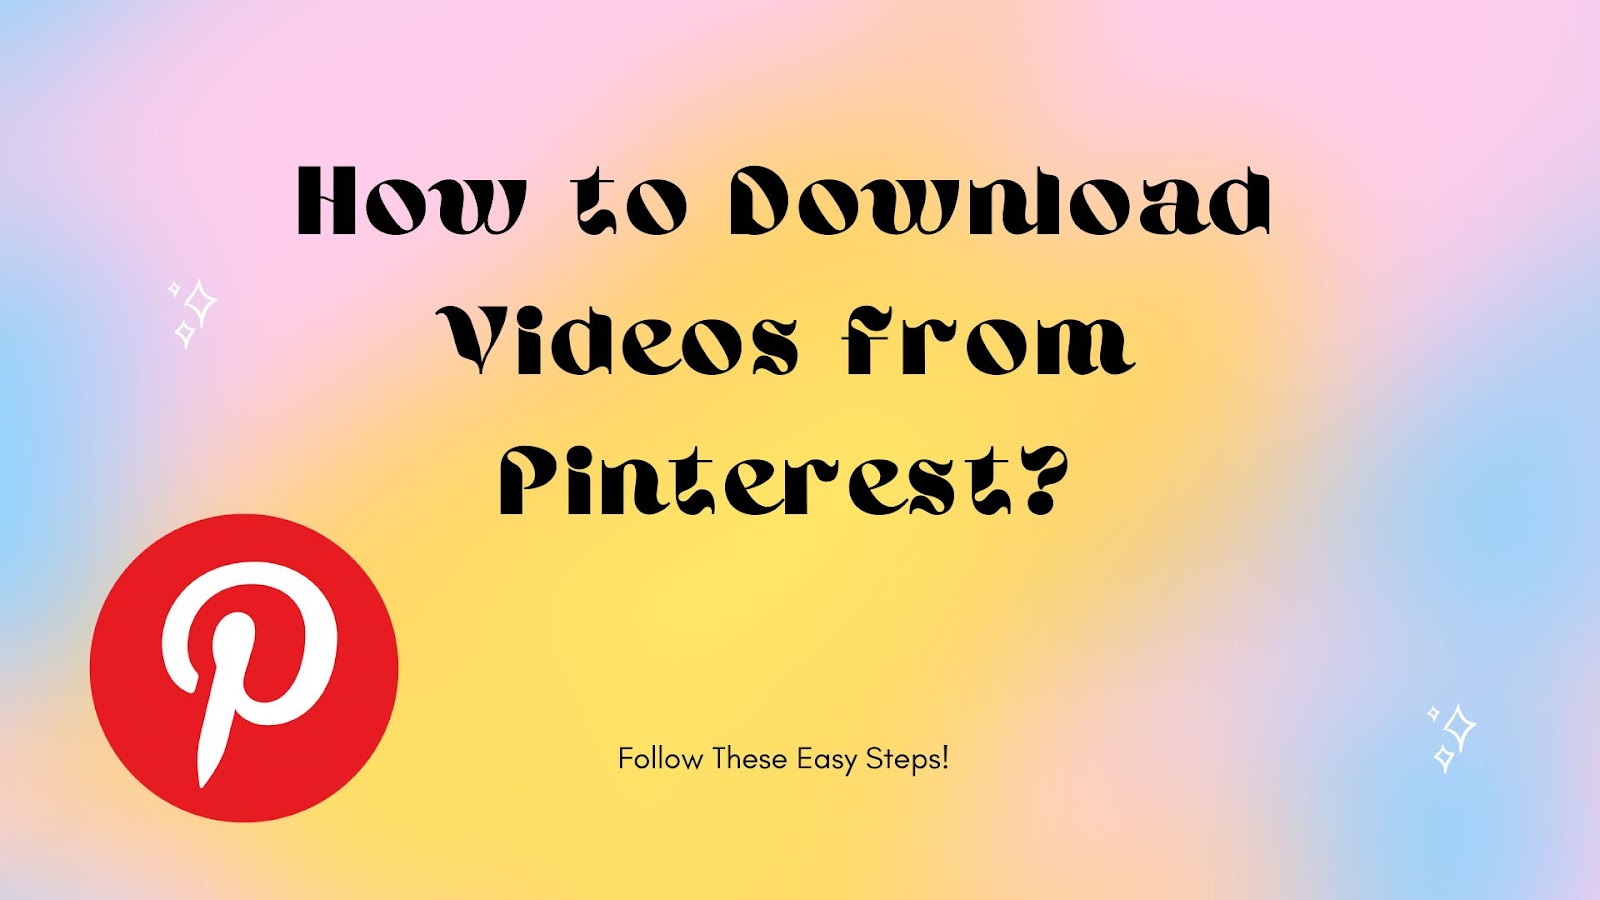 How to Download Videos from Pinterest by Using steptodown.com  ? Follow These Easy Steps!